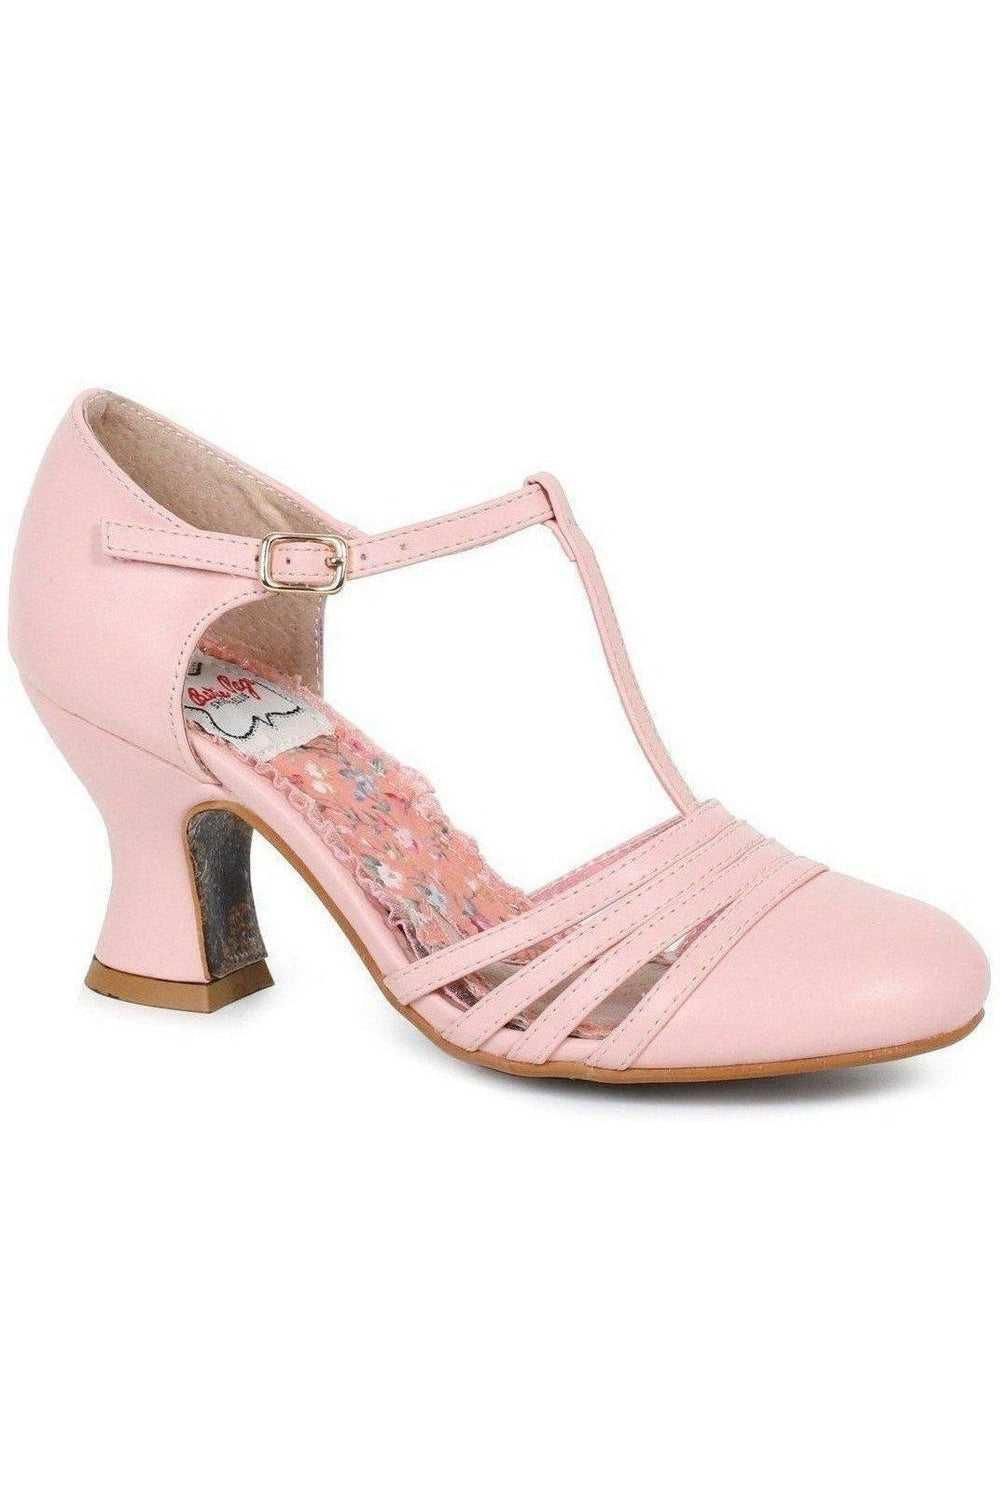 BP254-LUCY Pump | Pink Faux Leather-Bettie Page by Ellie-SEXYSHOES.COM